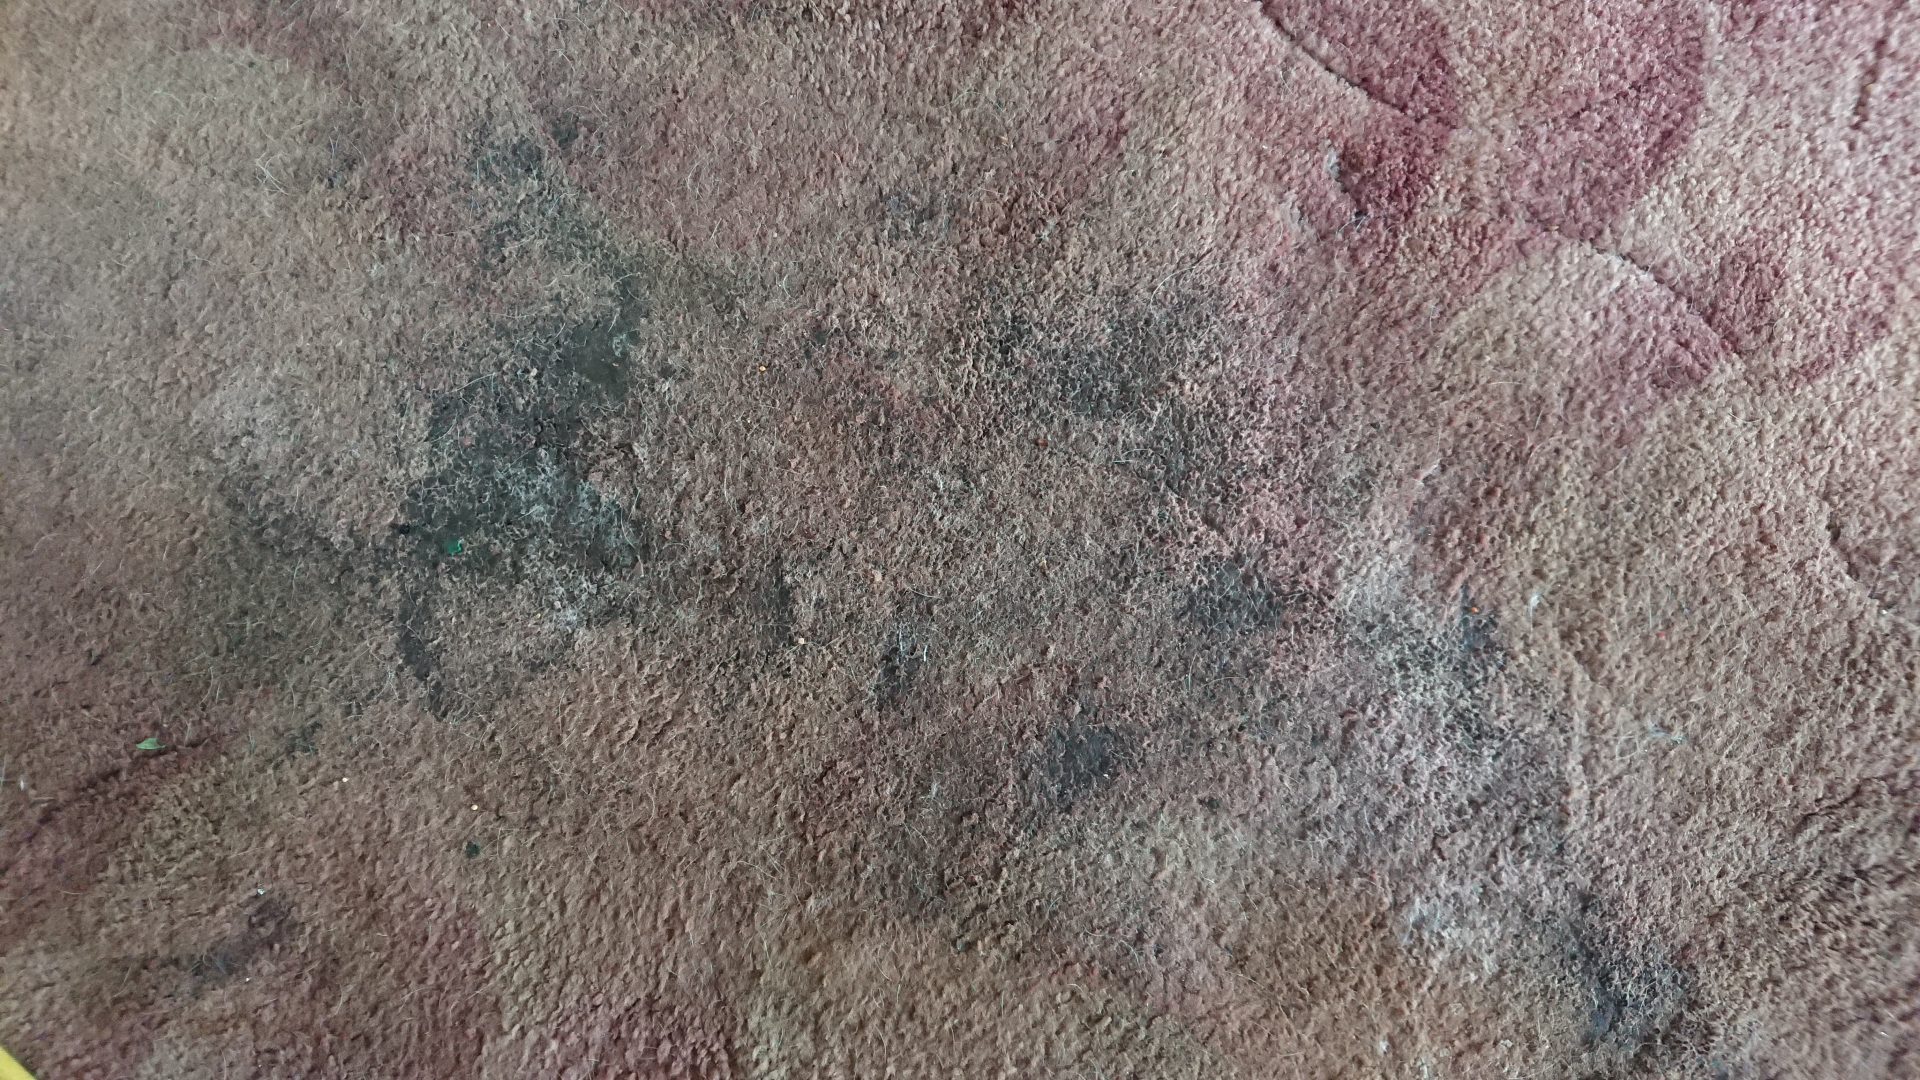 Dirty and flea infested carpet before cleaning